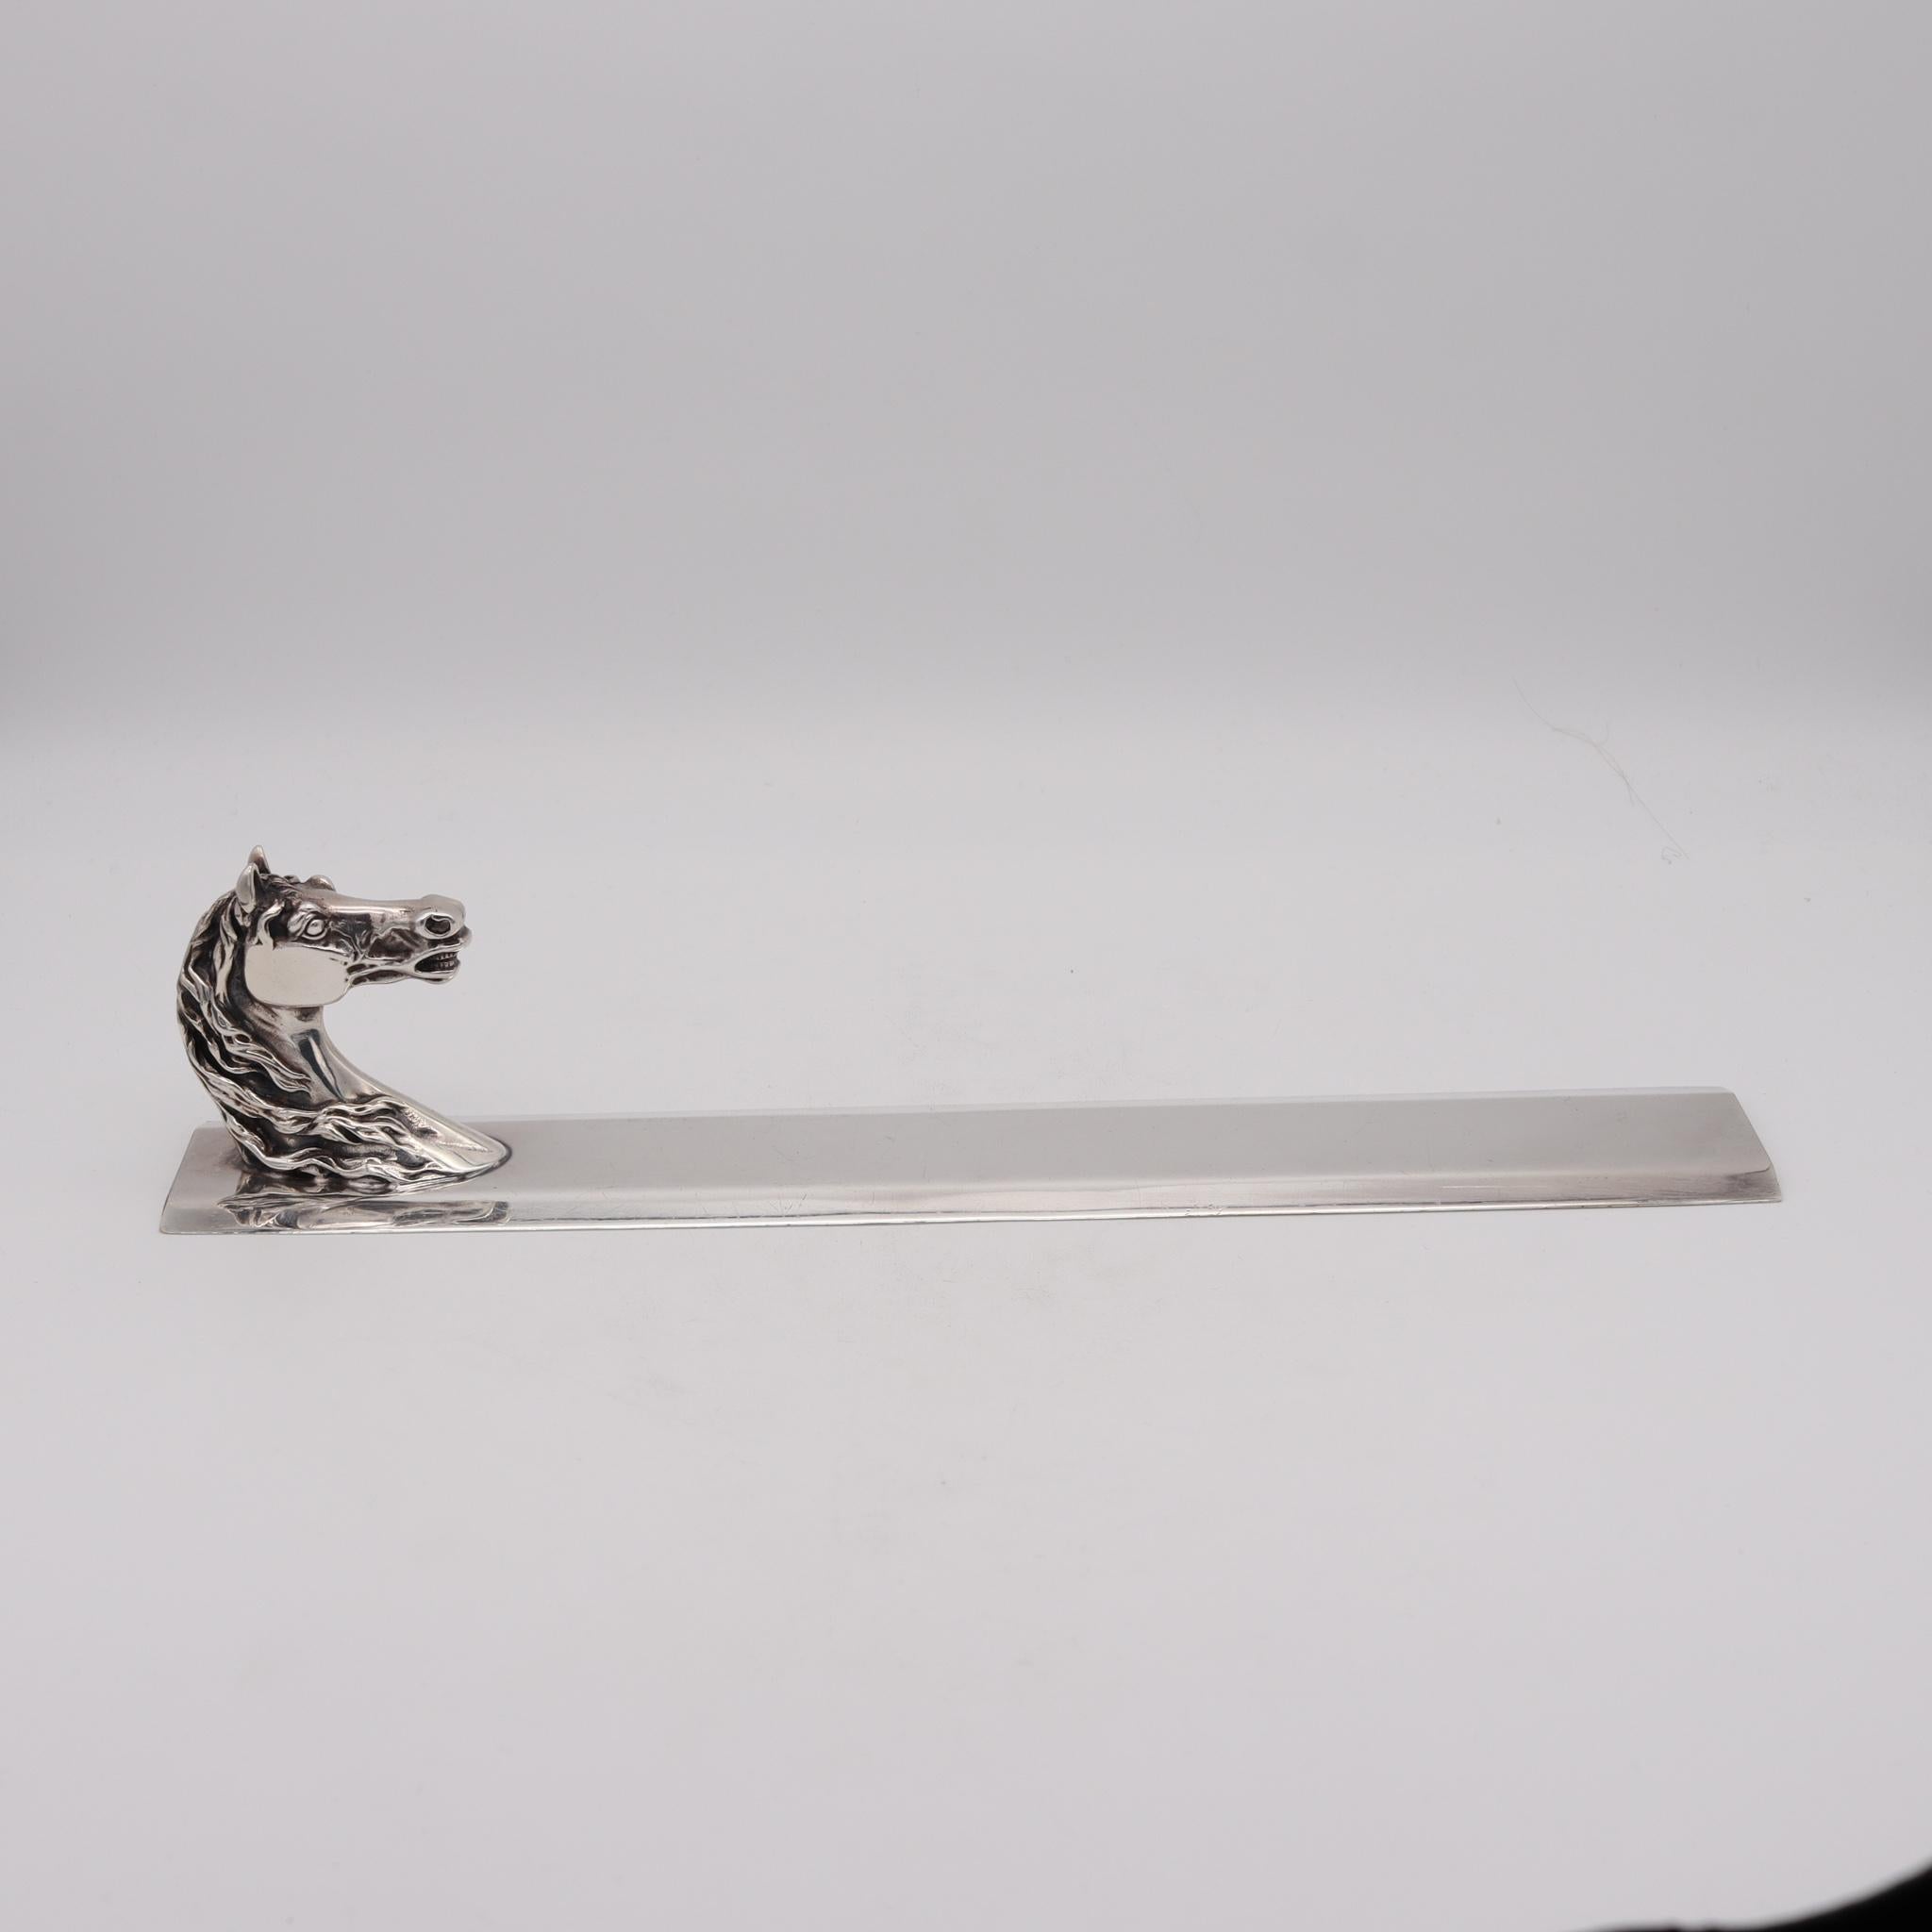 Desk paper weight letter opener set designed by Hermes.

Fabulous and highly decorative piece, created in Paris, France by the house of Hermes, back in the 1960. This useful horse-profile paper weight and letter opener is very rare and has been